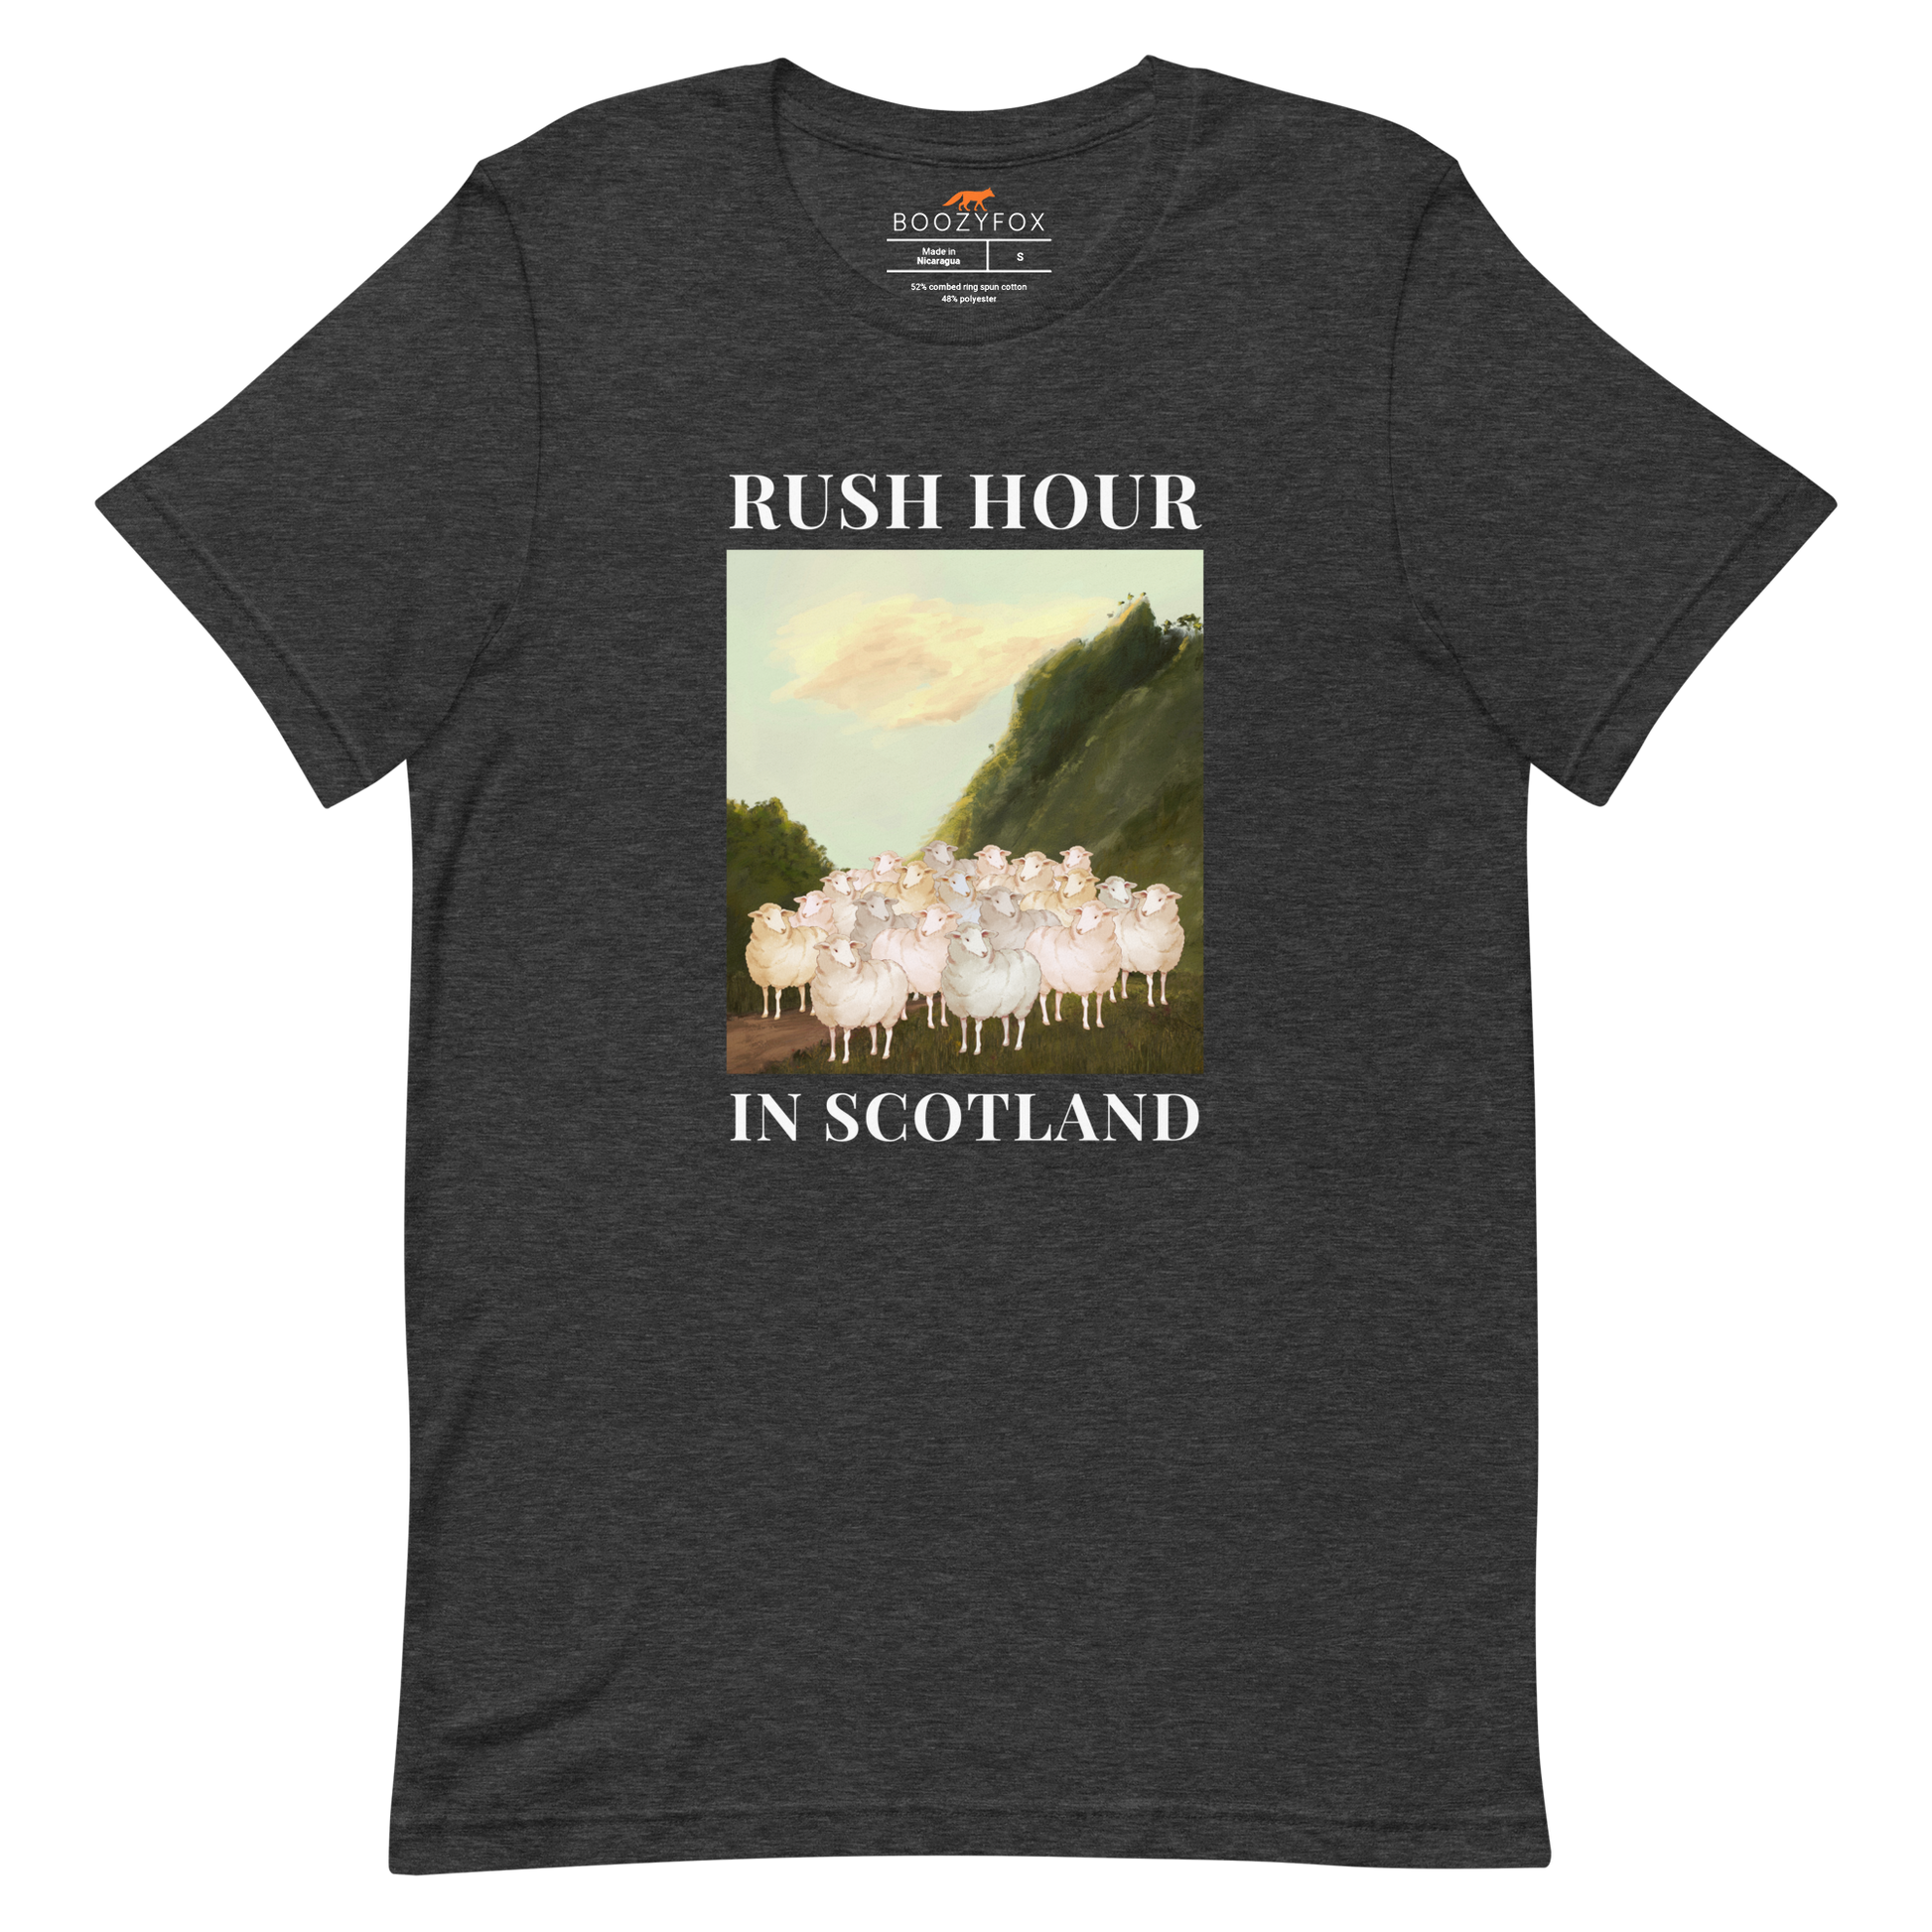 Dark Grey Heather Premium Sheep T-Shirt featuring a comical Rush Hour In Scotland graphic on the chest - Artsy/Funny Graphic Sheep Tees - Boozy Fox